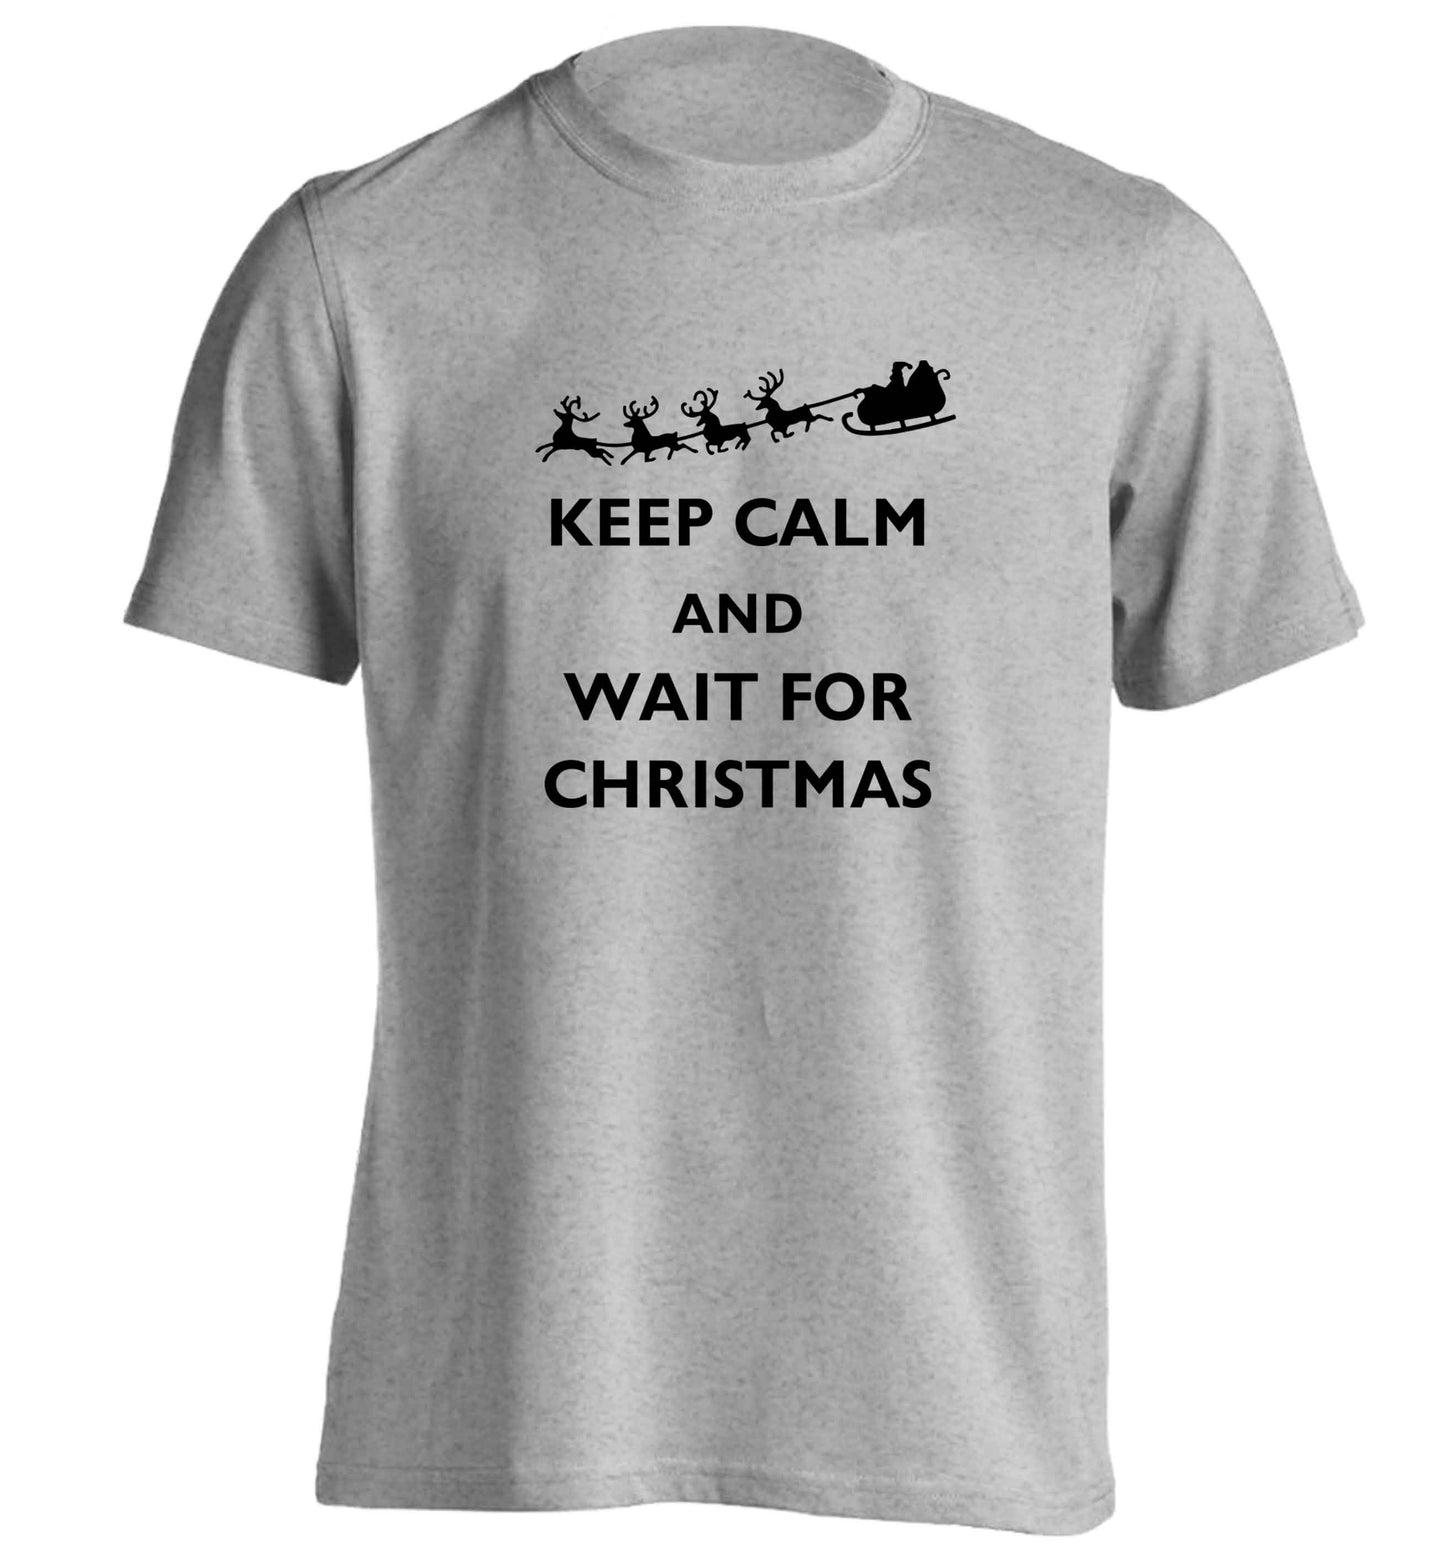 Keep calm and wait for Christmas adults unisex grey Tshirt 2XL